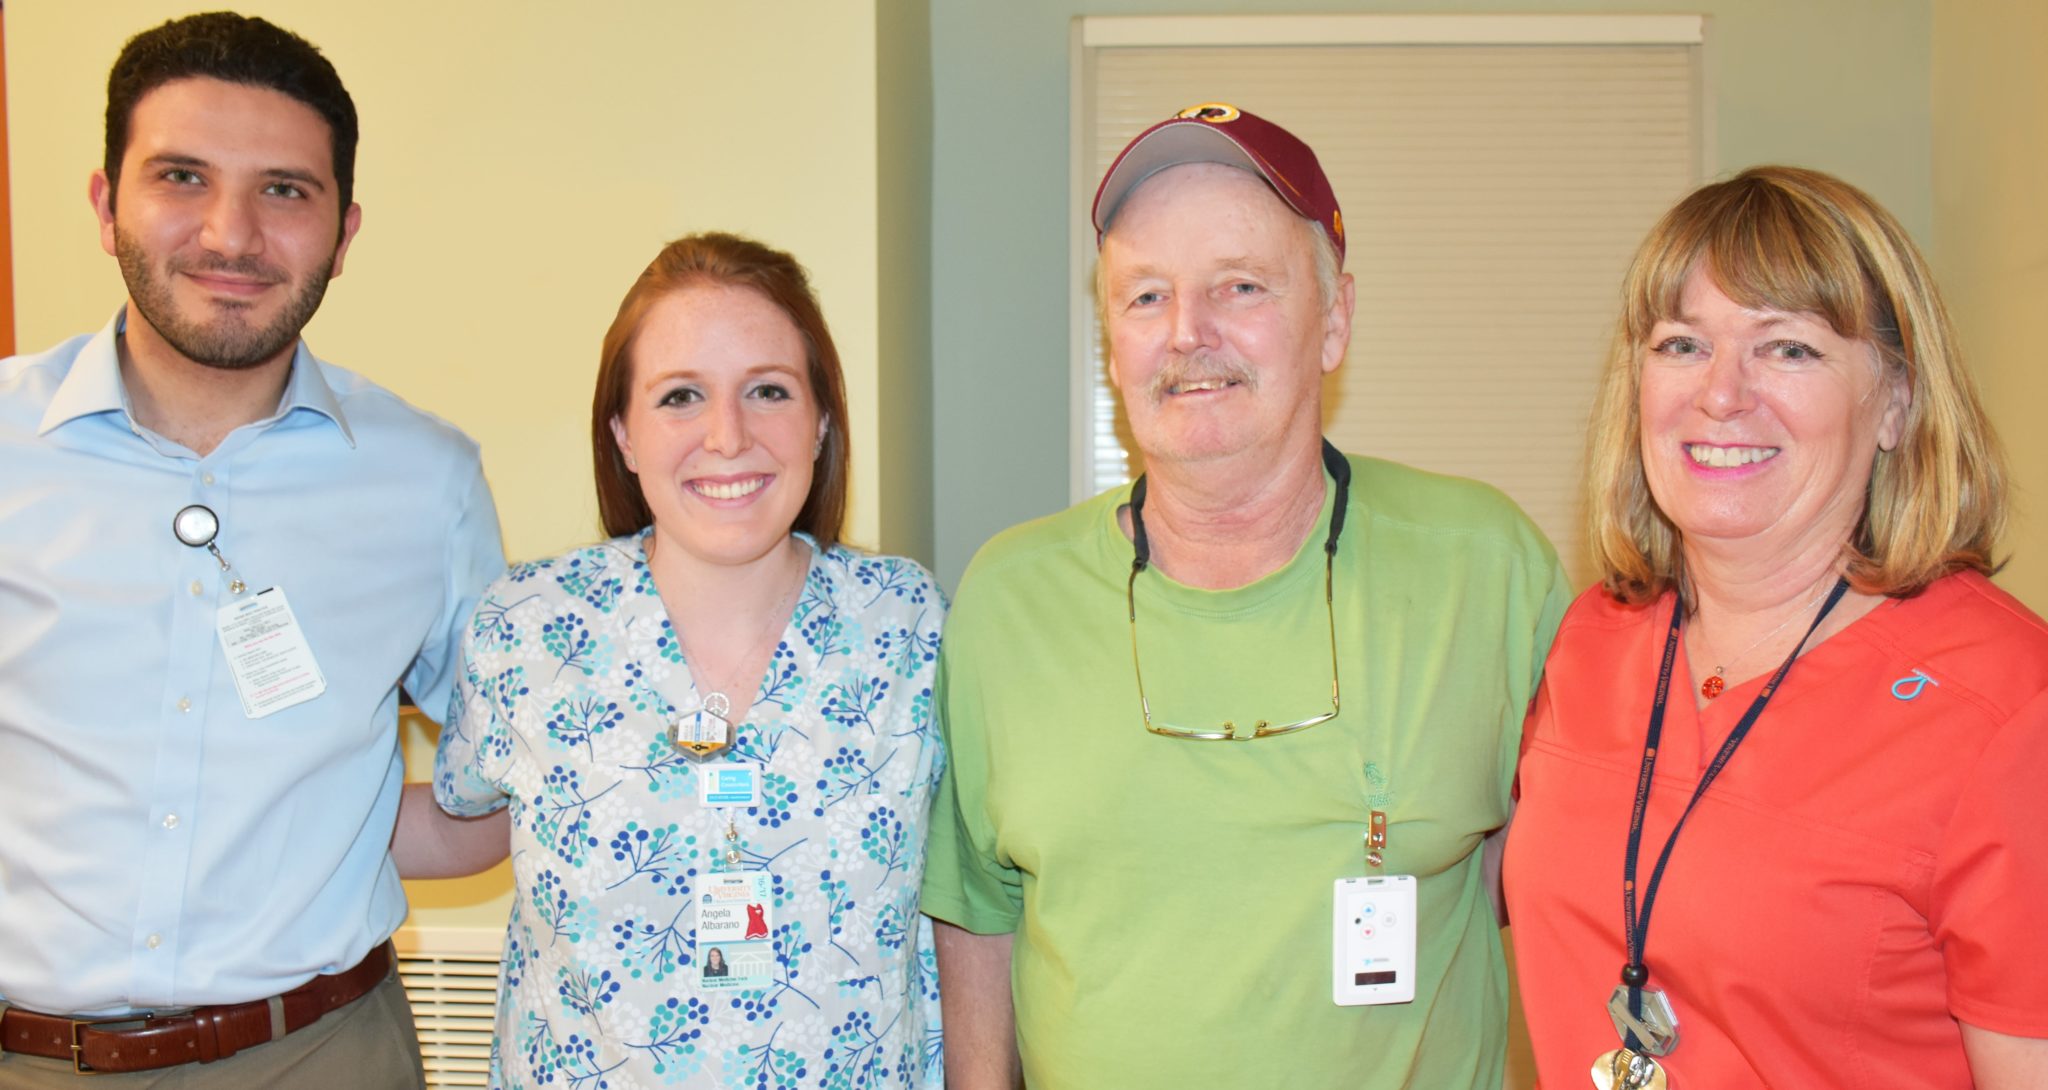 UVA radiation treatment patient and staff stand smiling at the camera